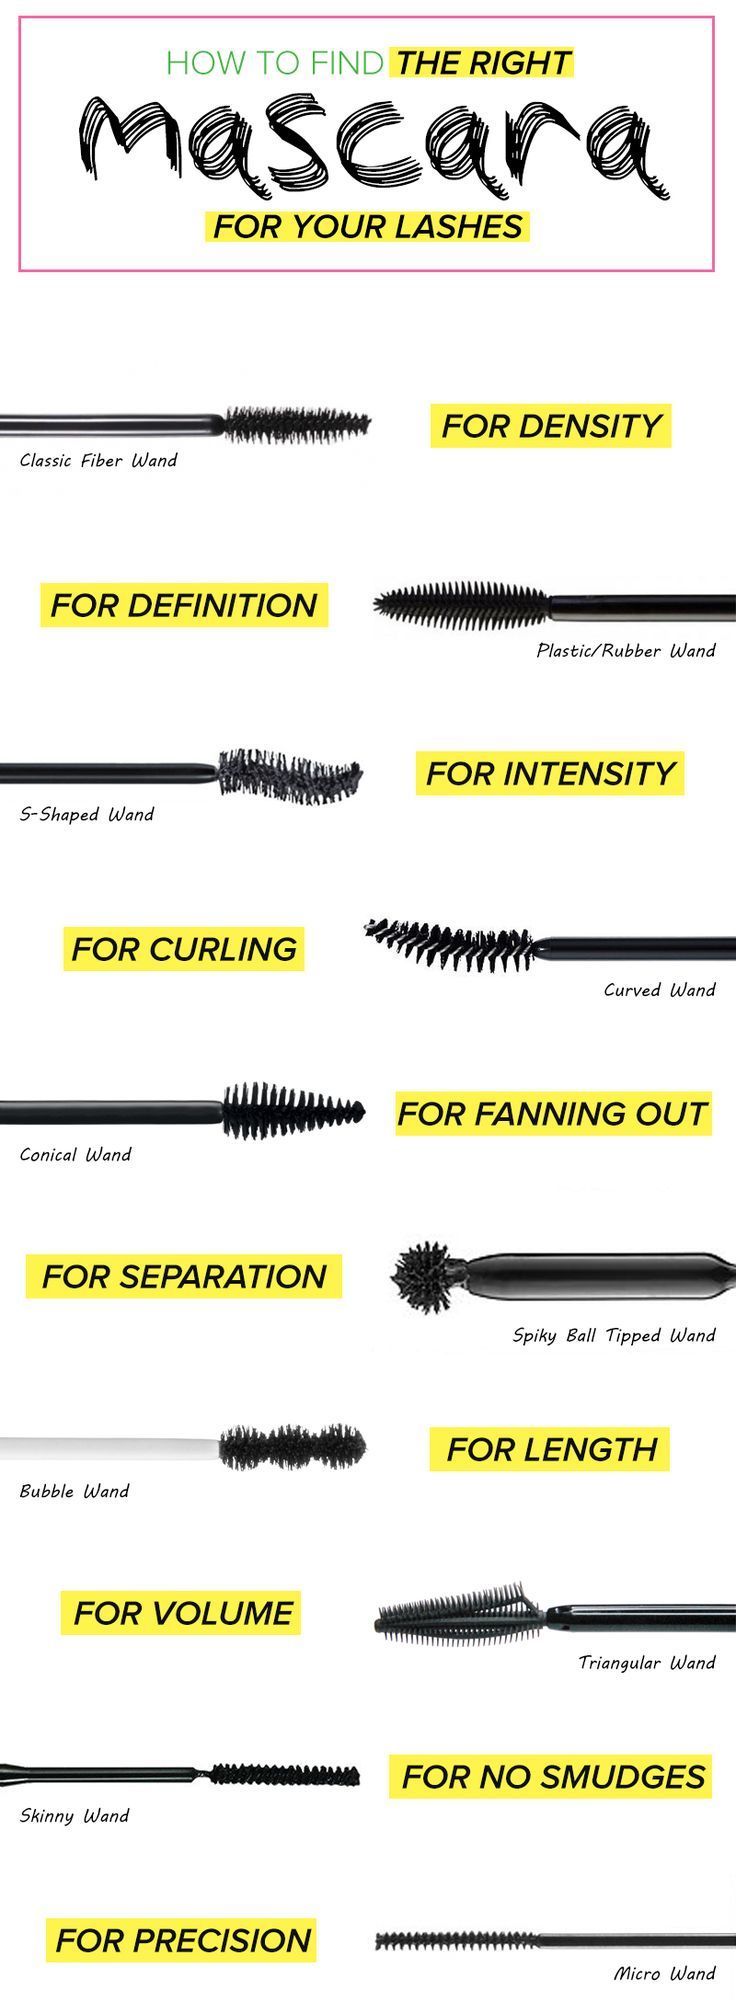 15 of the best mascaras under $9, according to celebrity makeup artists - 15 of the best mascaras under $9, according to celebrity makeup artists -   14 beauty Tips instagram ideas